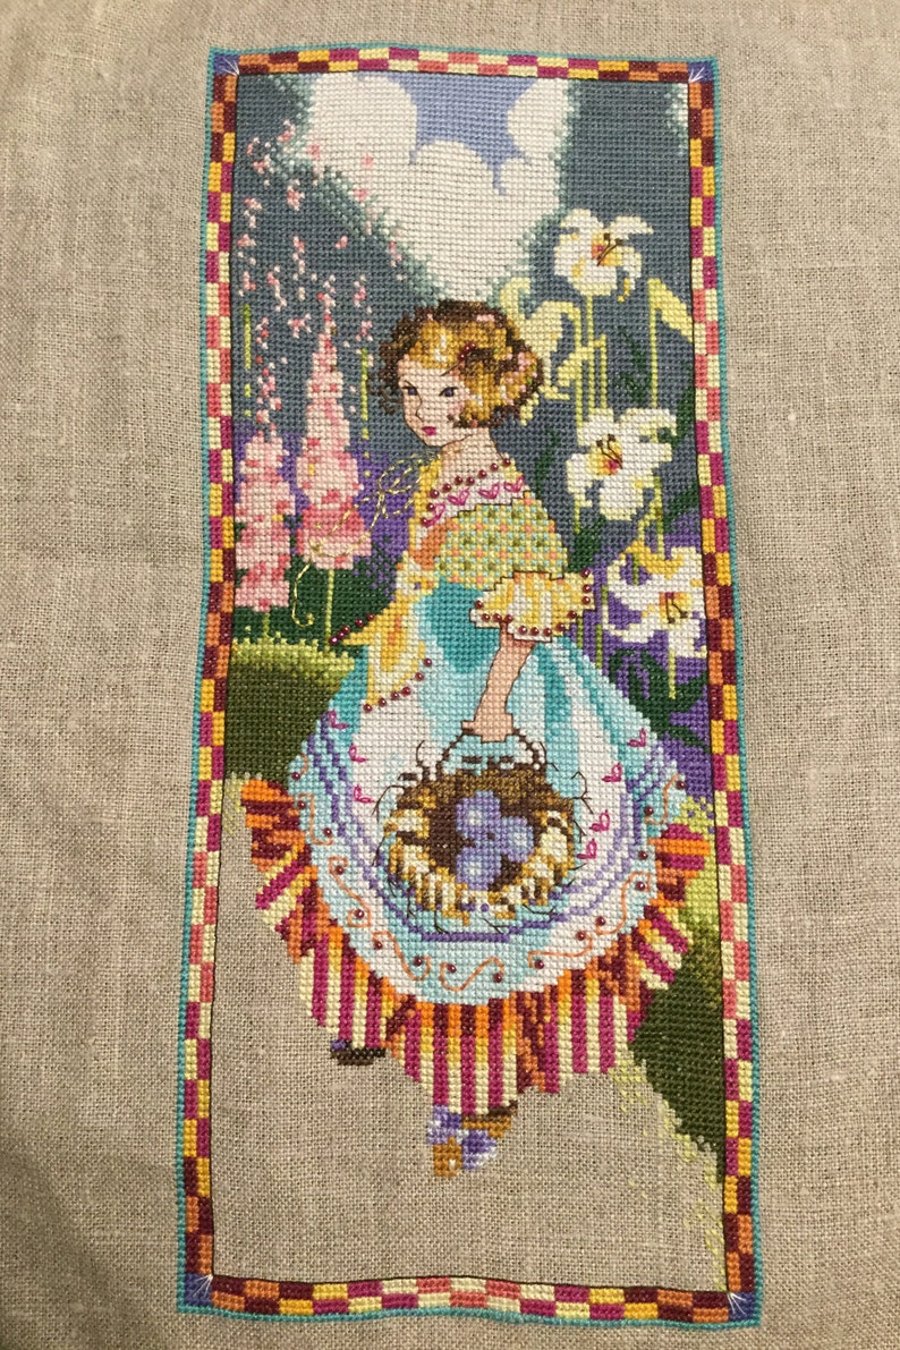 Completed cross stitch unframed Mirabilia gathering eggs 5” x 12”